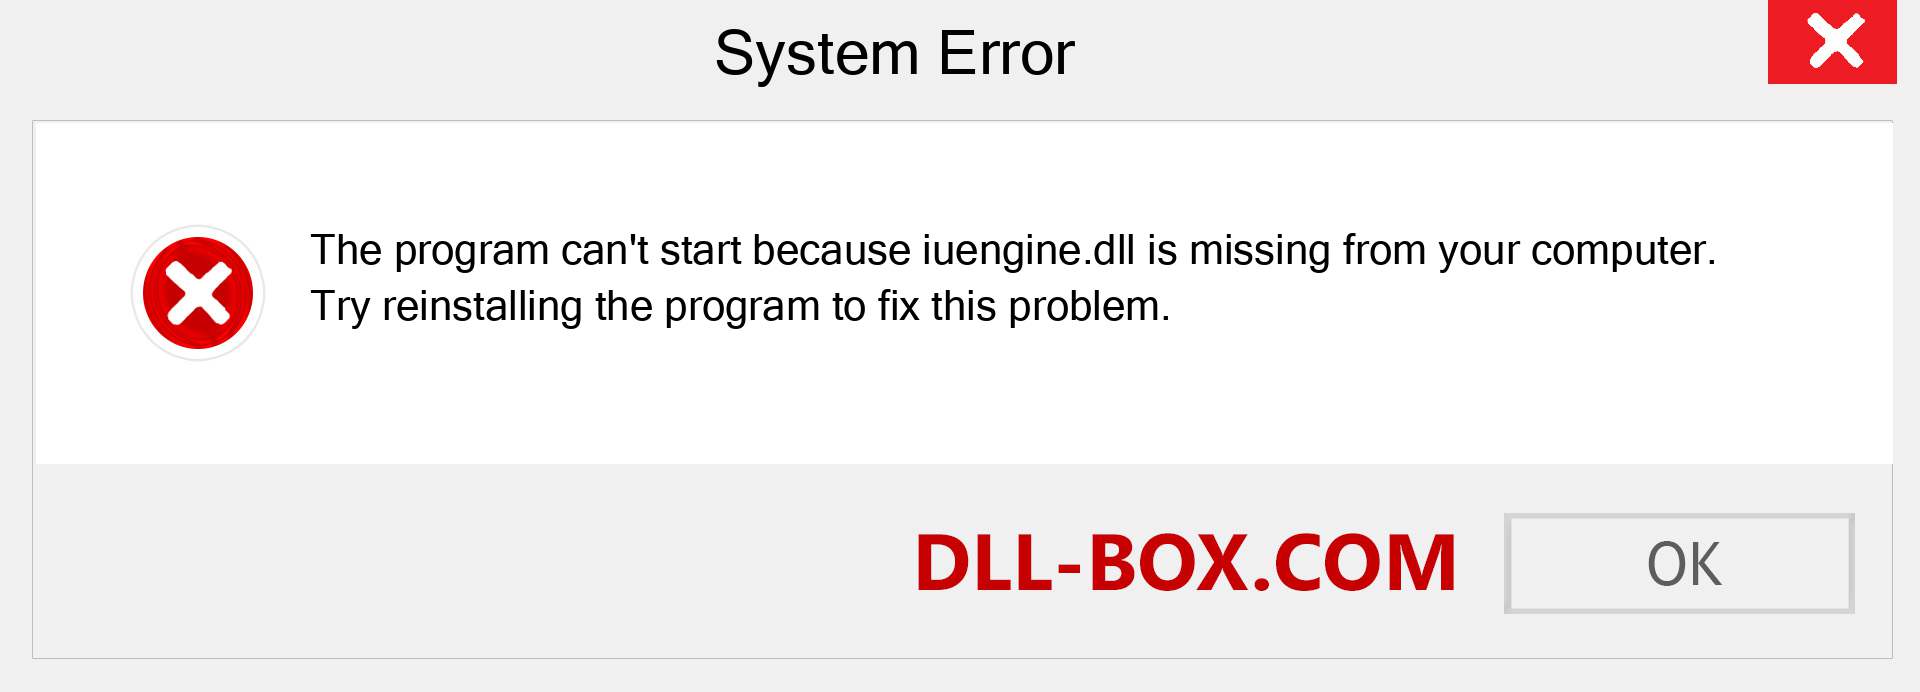  iuengine.dll file is missing?. Download for Windows 7, 8, 10 - Fix  iuengine dll Missing Error on Windows, photos, images